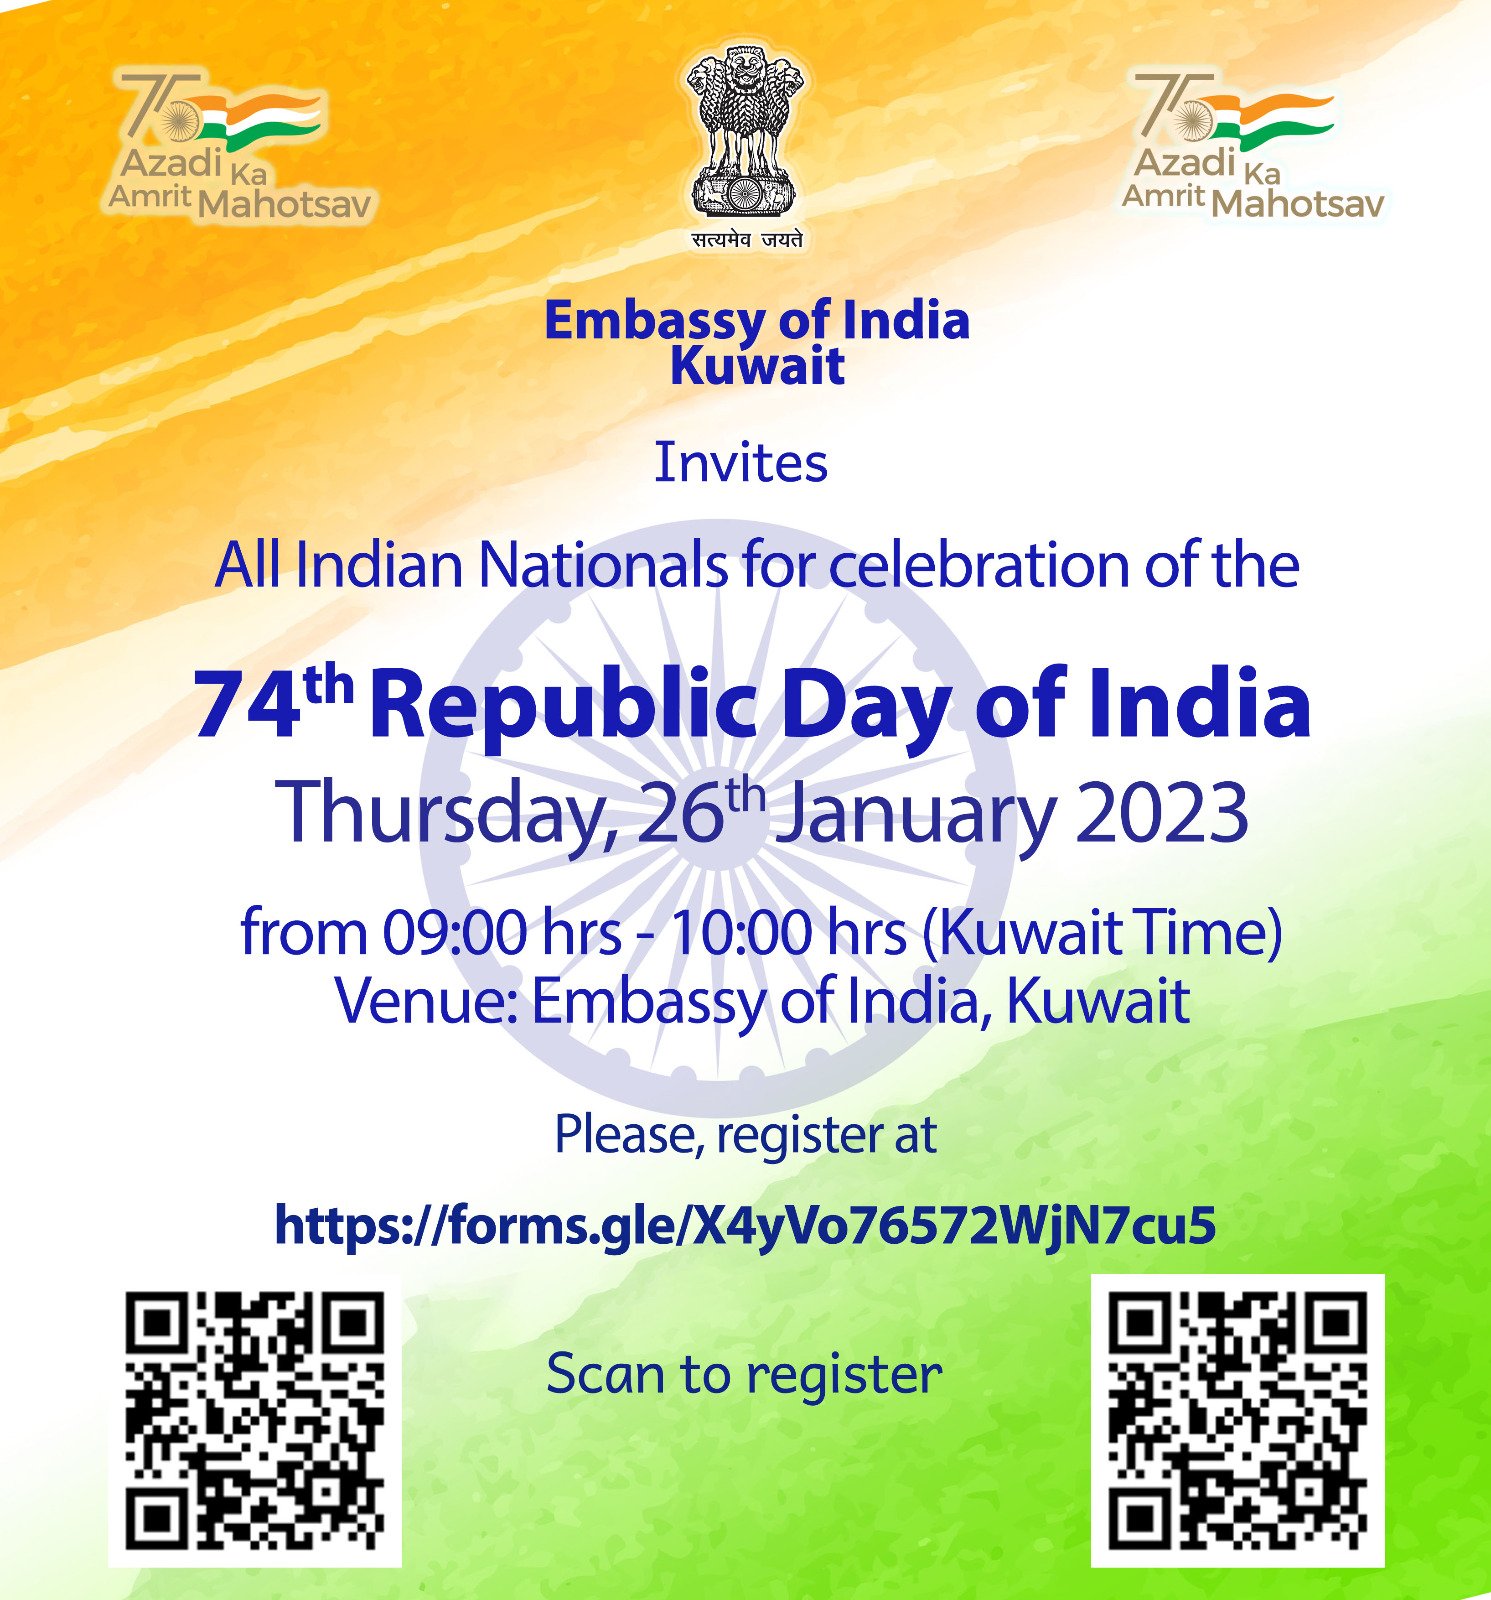 Embassy of India Kuwait Invites to Register for 74th Republic Day